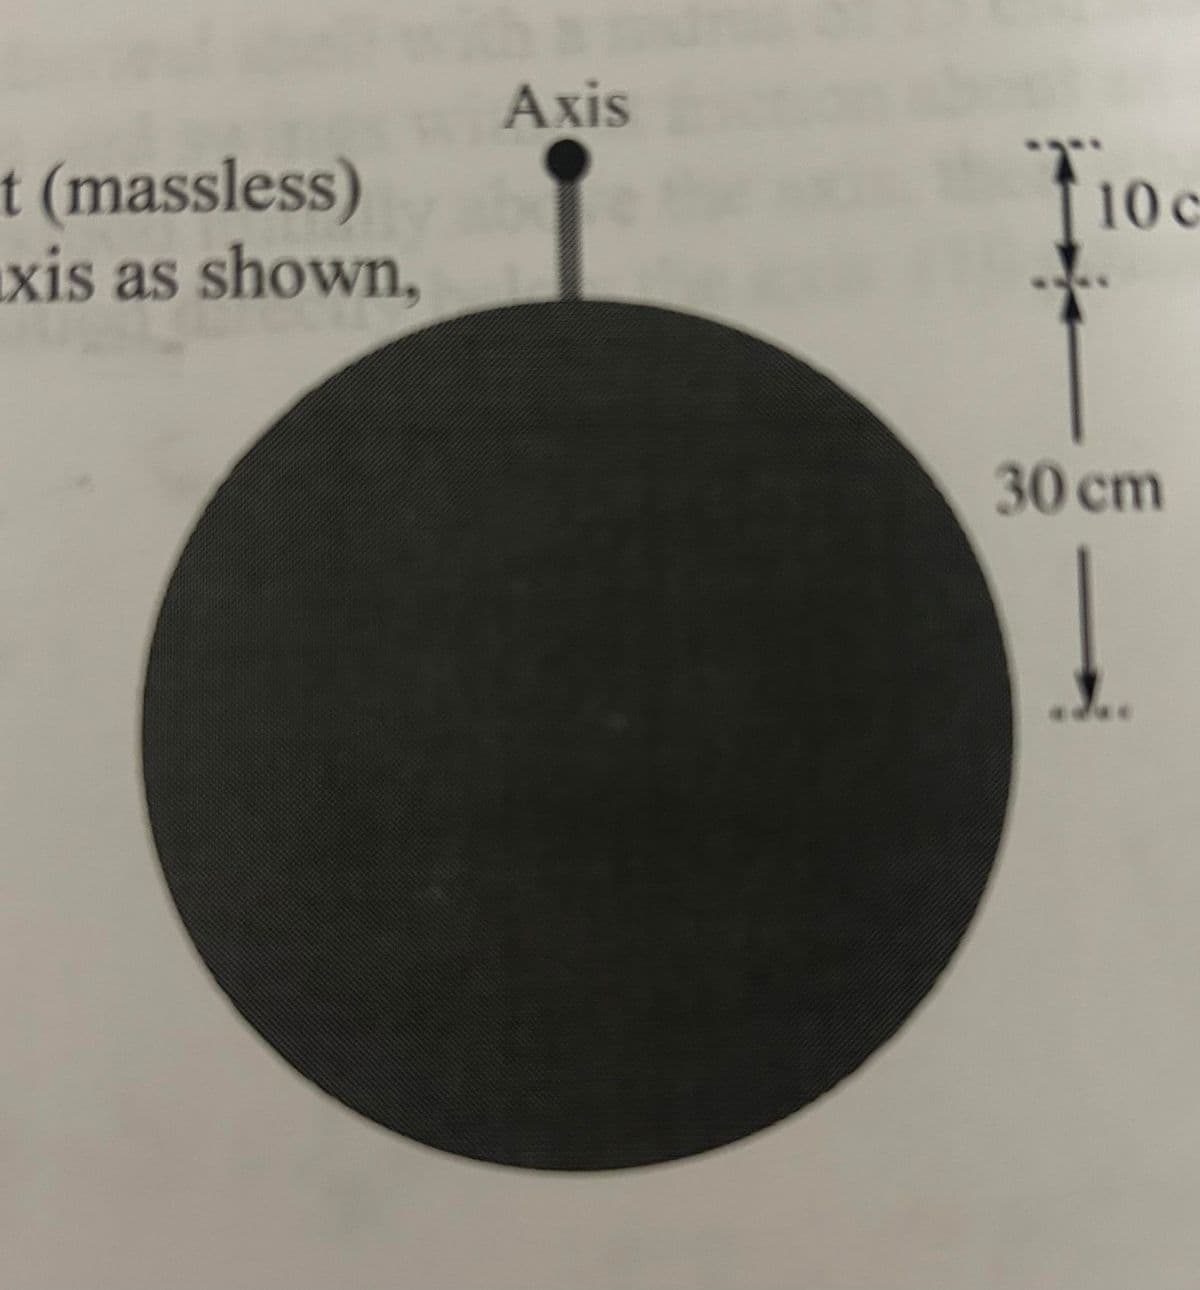 t (massless)
xis as shown,
Axis
10 c
30 cm
↓